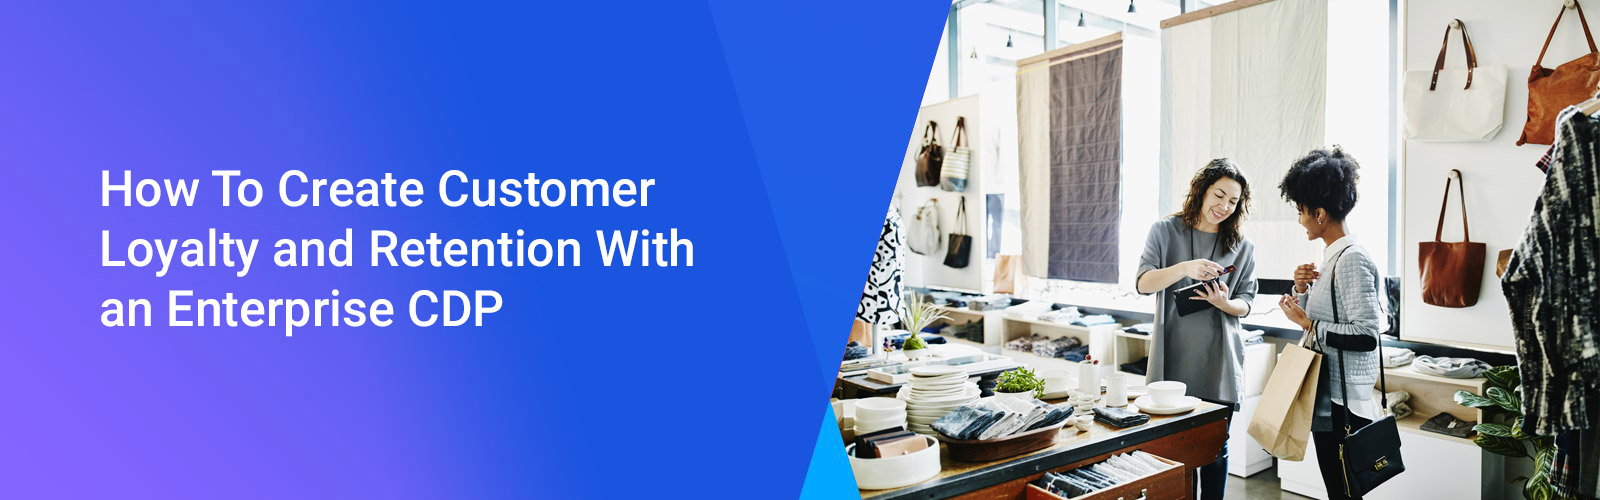 Want to keep more loyal customers, for longer? A CDP like Treasure Data’s can boost customer loyalty and retention by unifying customer profiles to derive actionable insights. Learn more in this article.